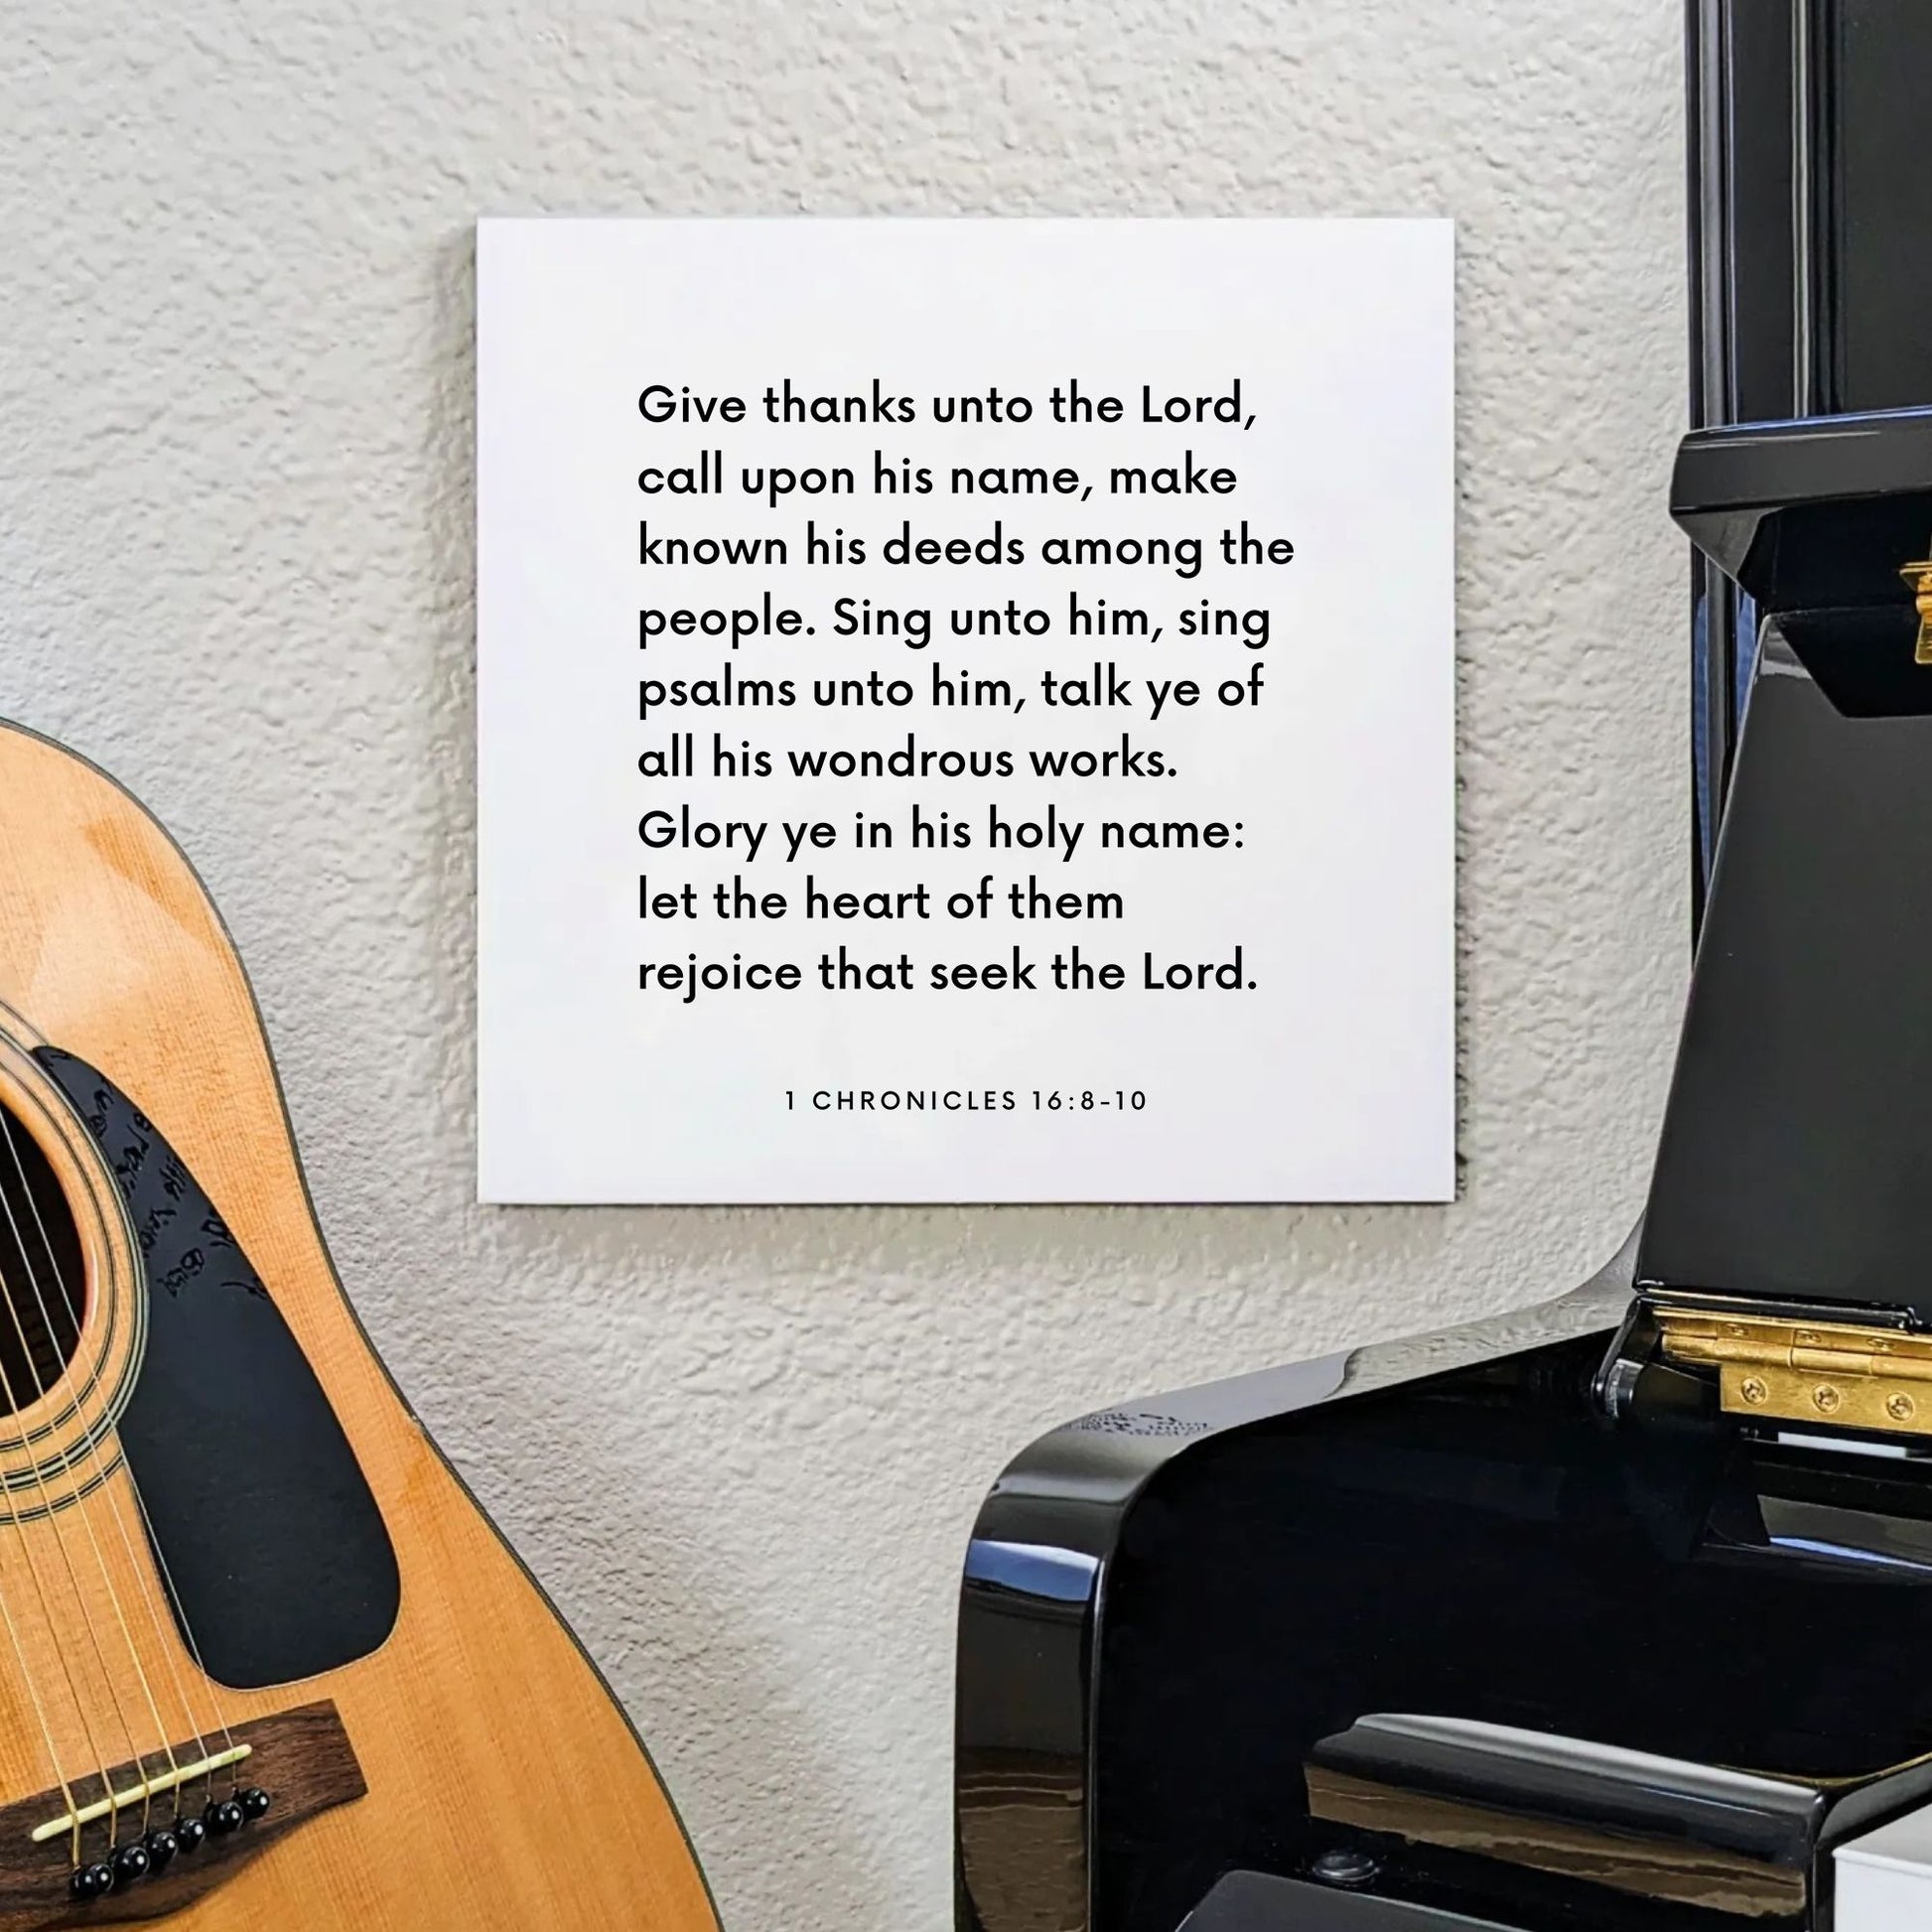 Music mouting of the scripture tile for 1 Chronicles 16:8-10 - "Give thanks unto the Lord, call upon his name"